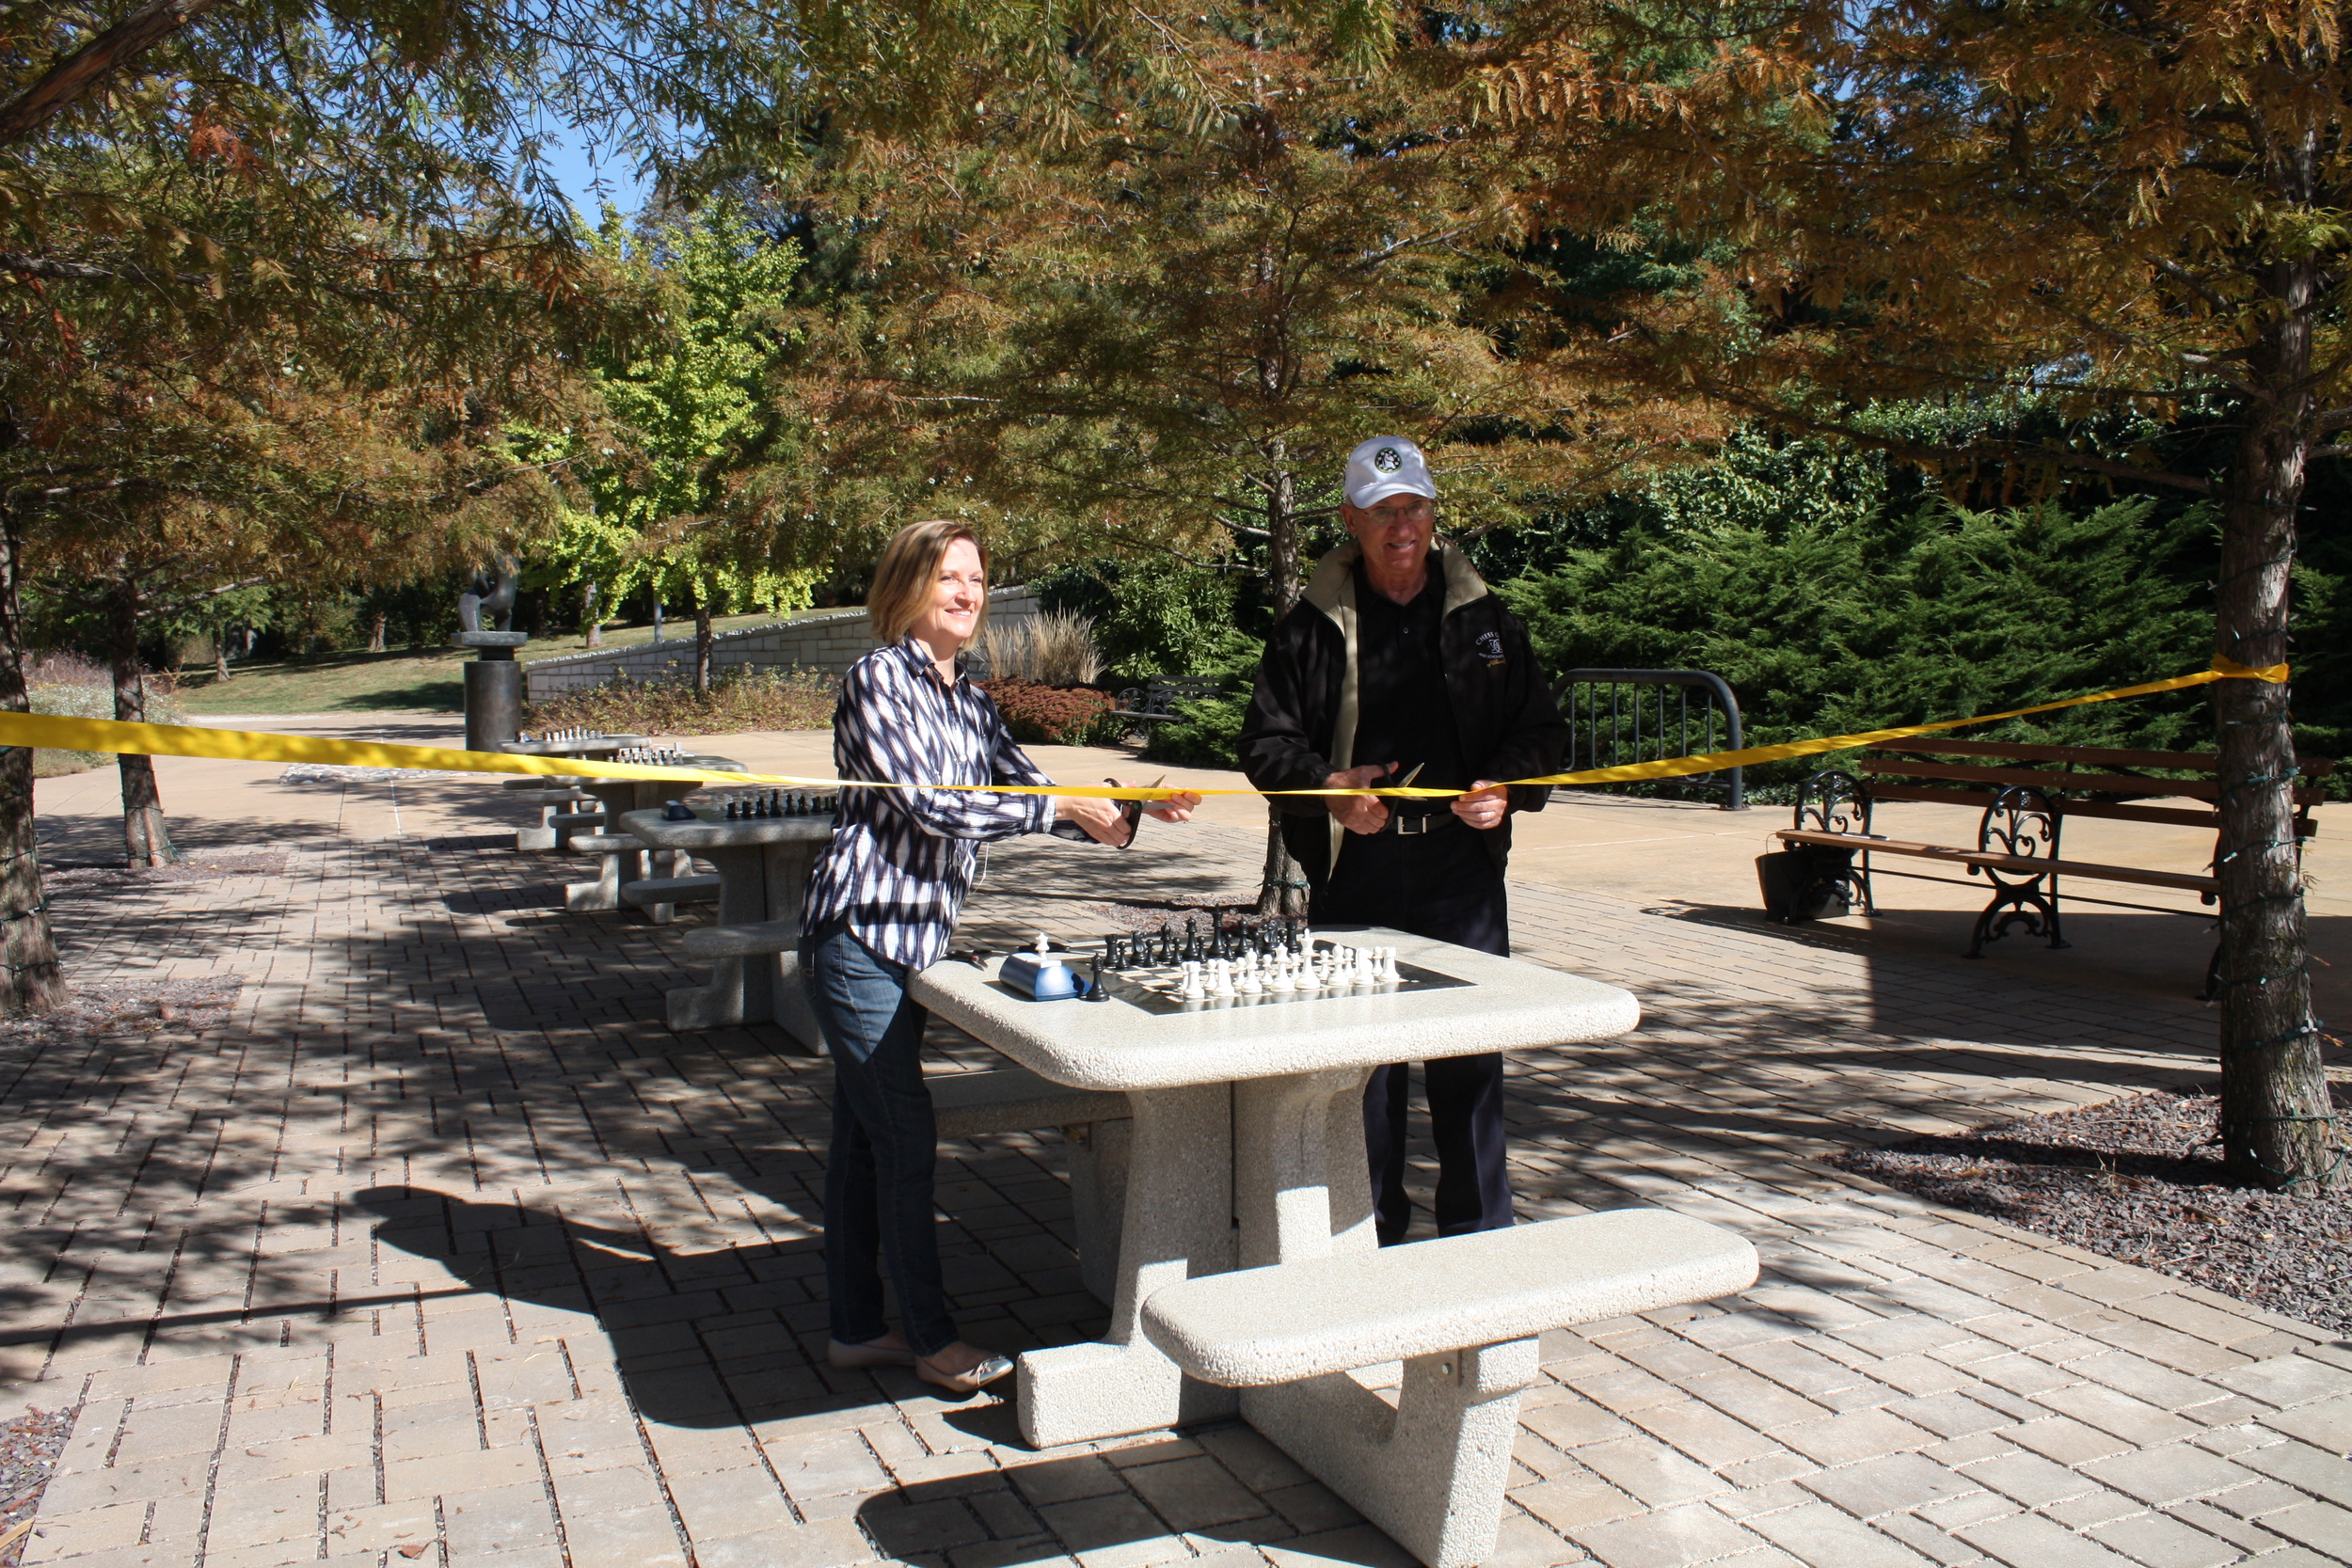  Forest Park Forever President and Executive Director Lesley S. Hoffarth, P.E. cuts the ribbon on Forest Park’s new chess plaza with Rex Sinquefield, founder of the Chess Club and Scholastic Center of Saint Louis 